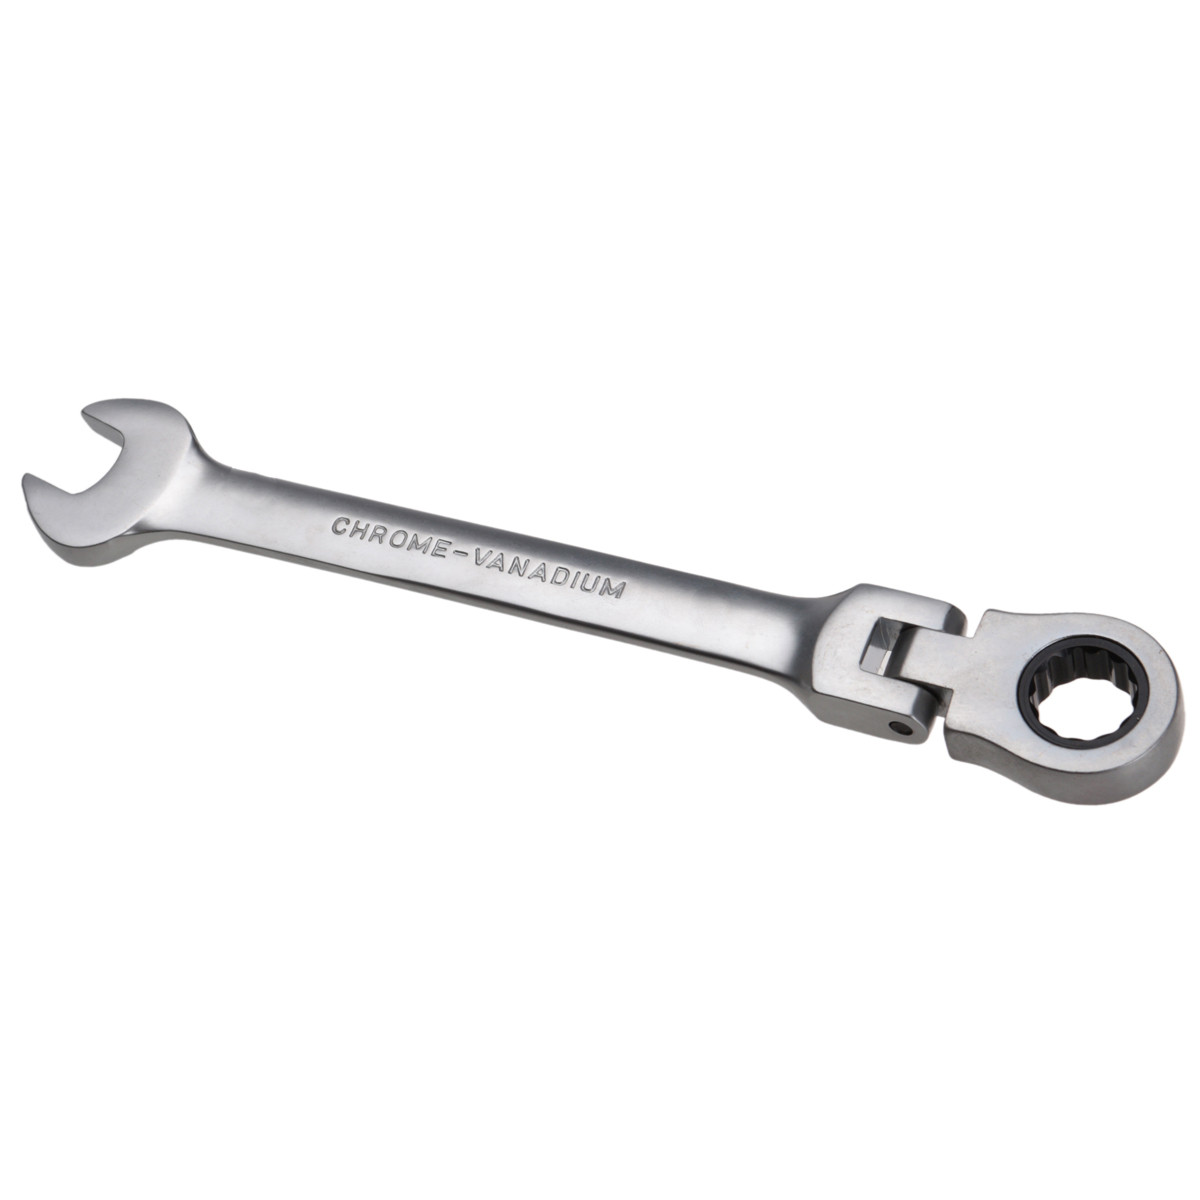 13-mm-Flexible-Head-Wrench-Ratchet-Metric-Spanner-Open-End-and-Ring-Wrenches-Tool-979824